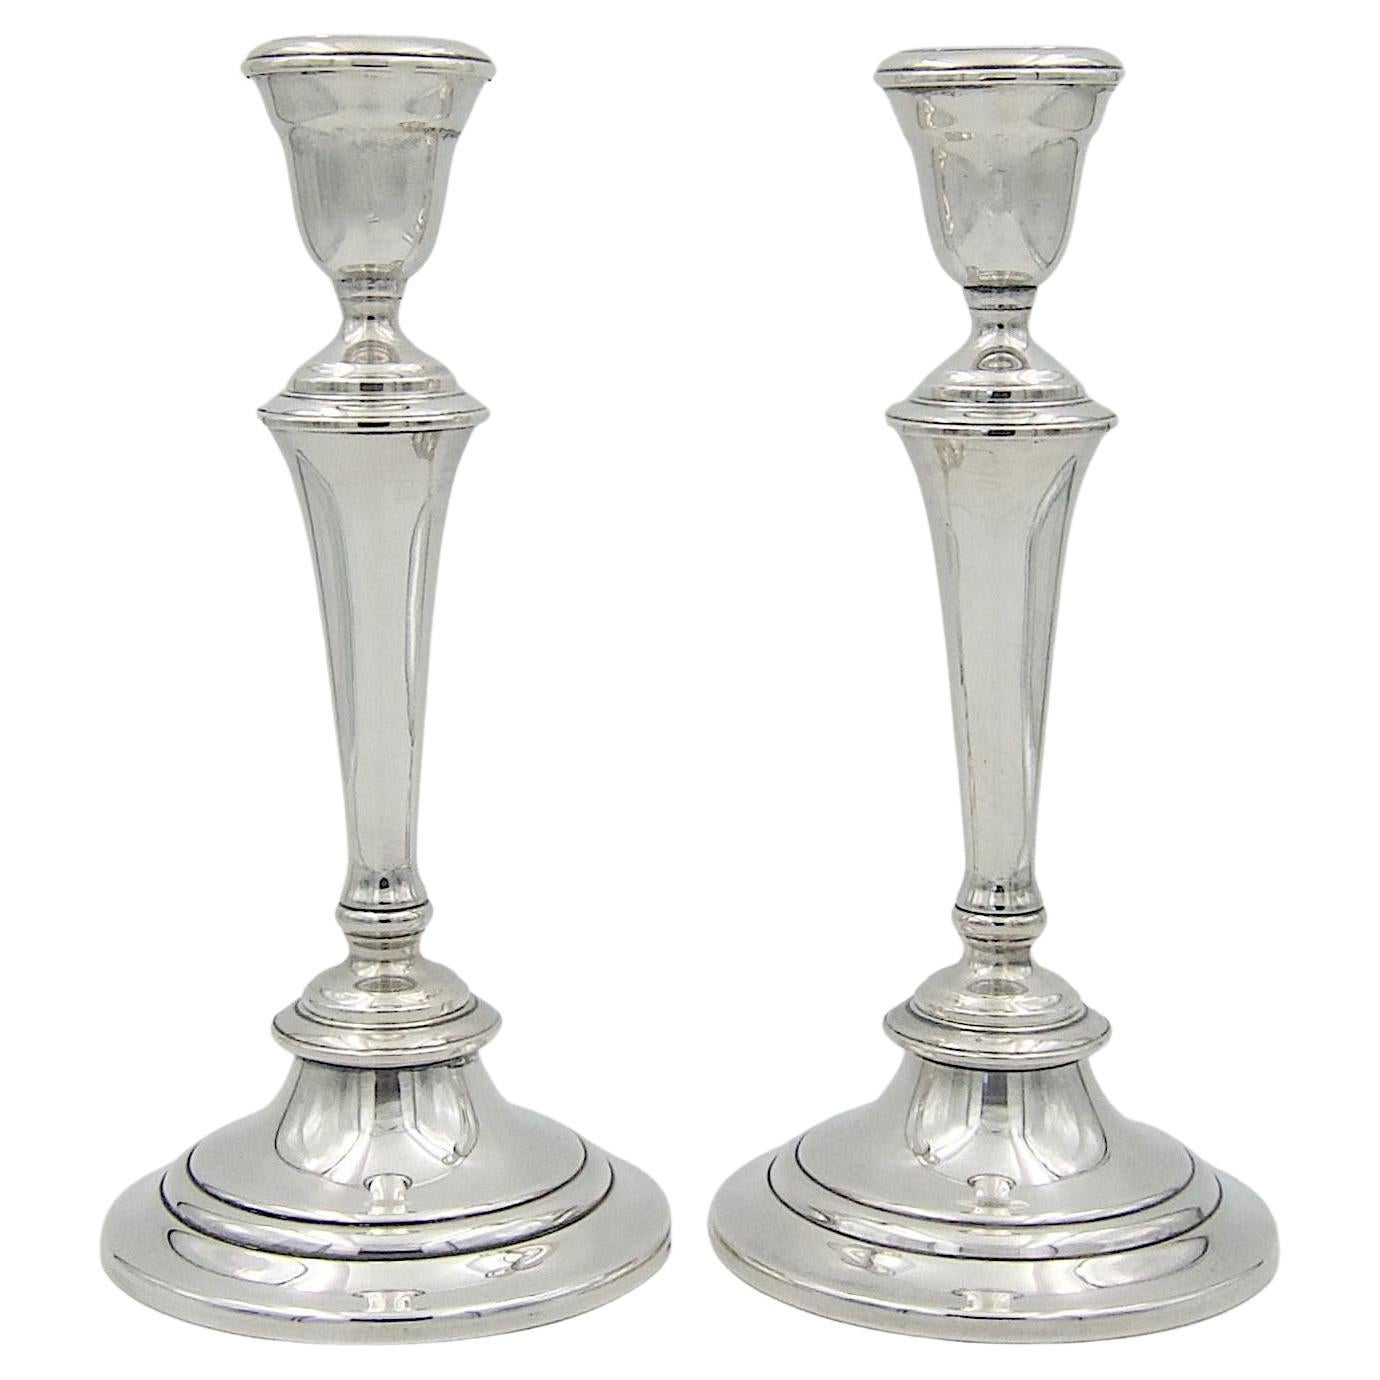 Vintage Pair of Gorham Convertible Candlesticks in Silver Plate